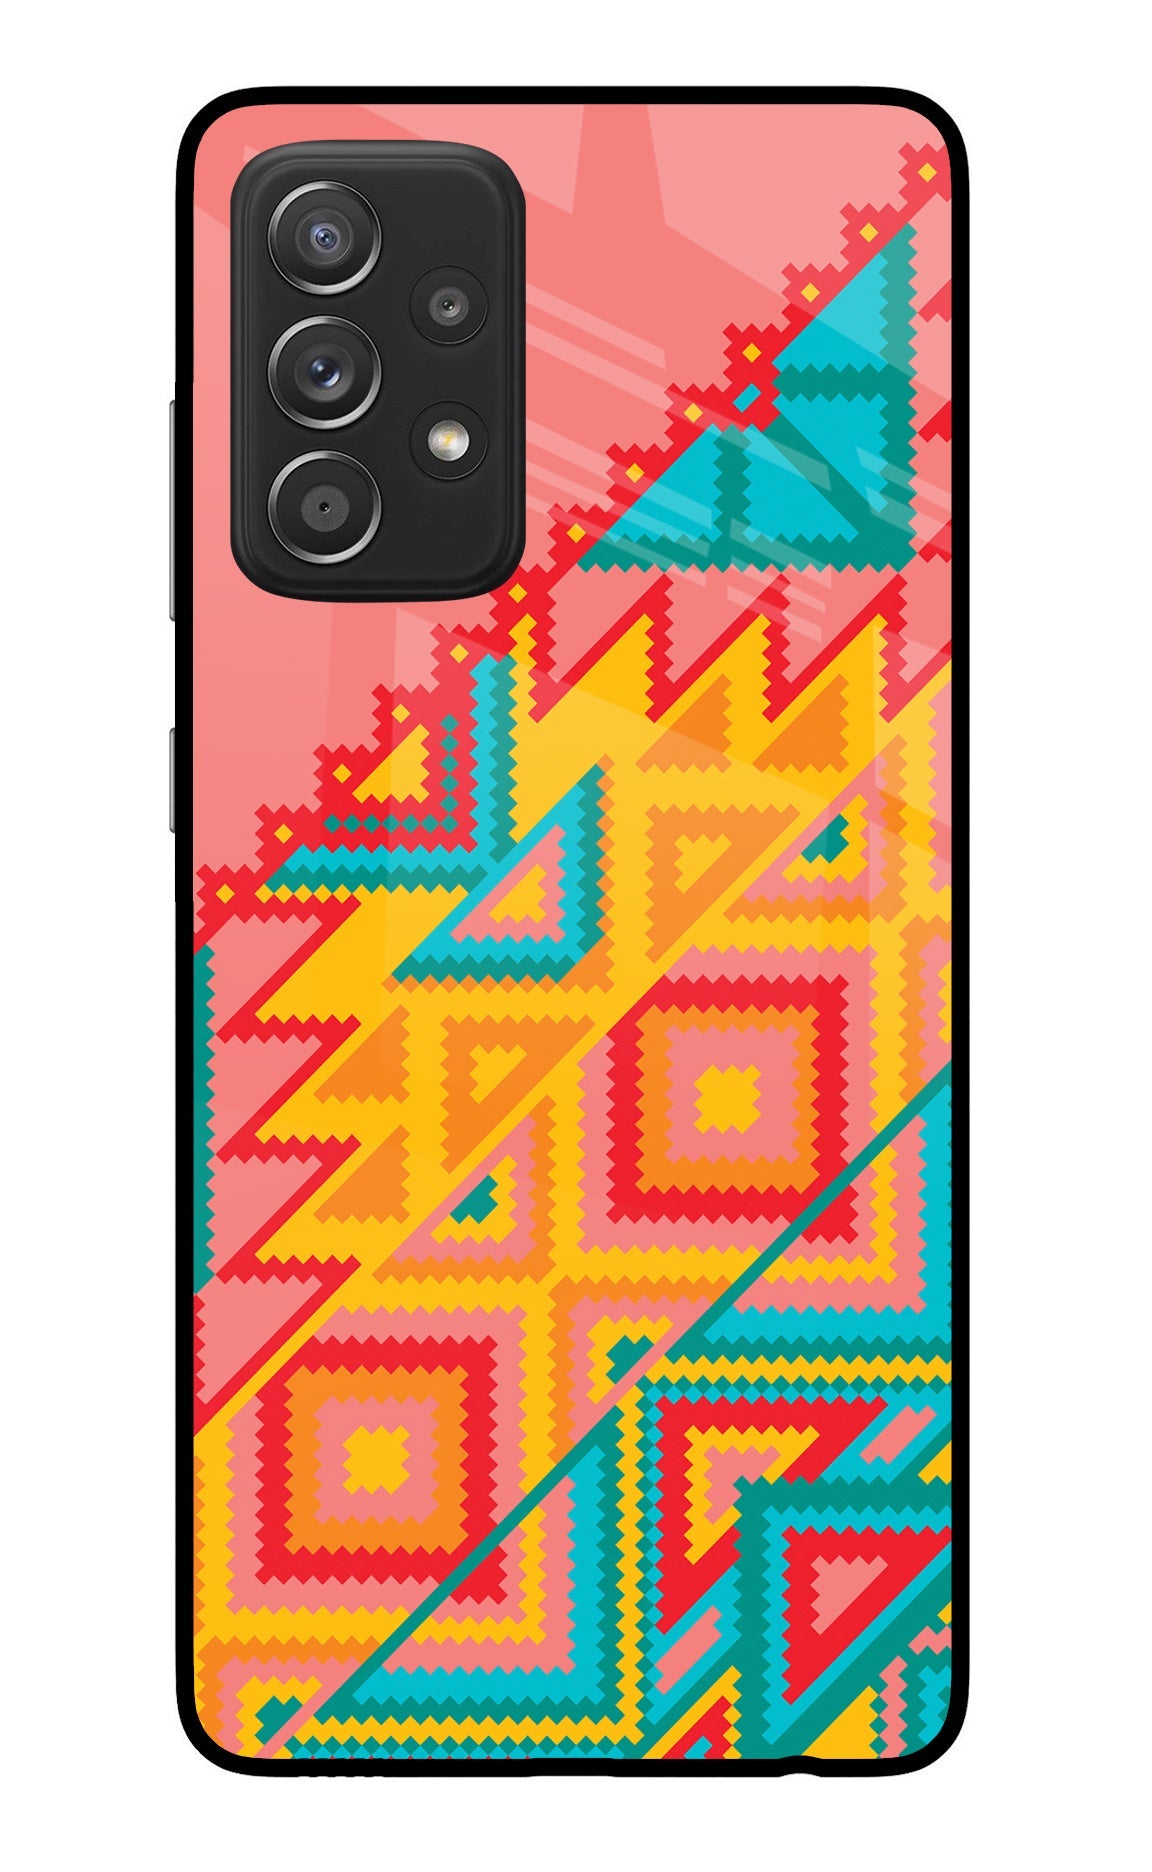 Aztec Tribal Samsung A52/A52s 5G Back Cover